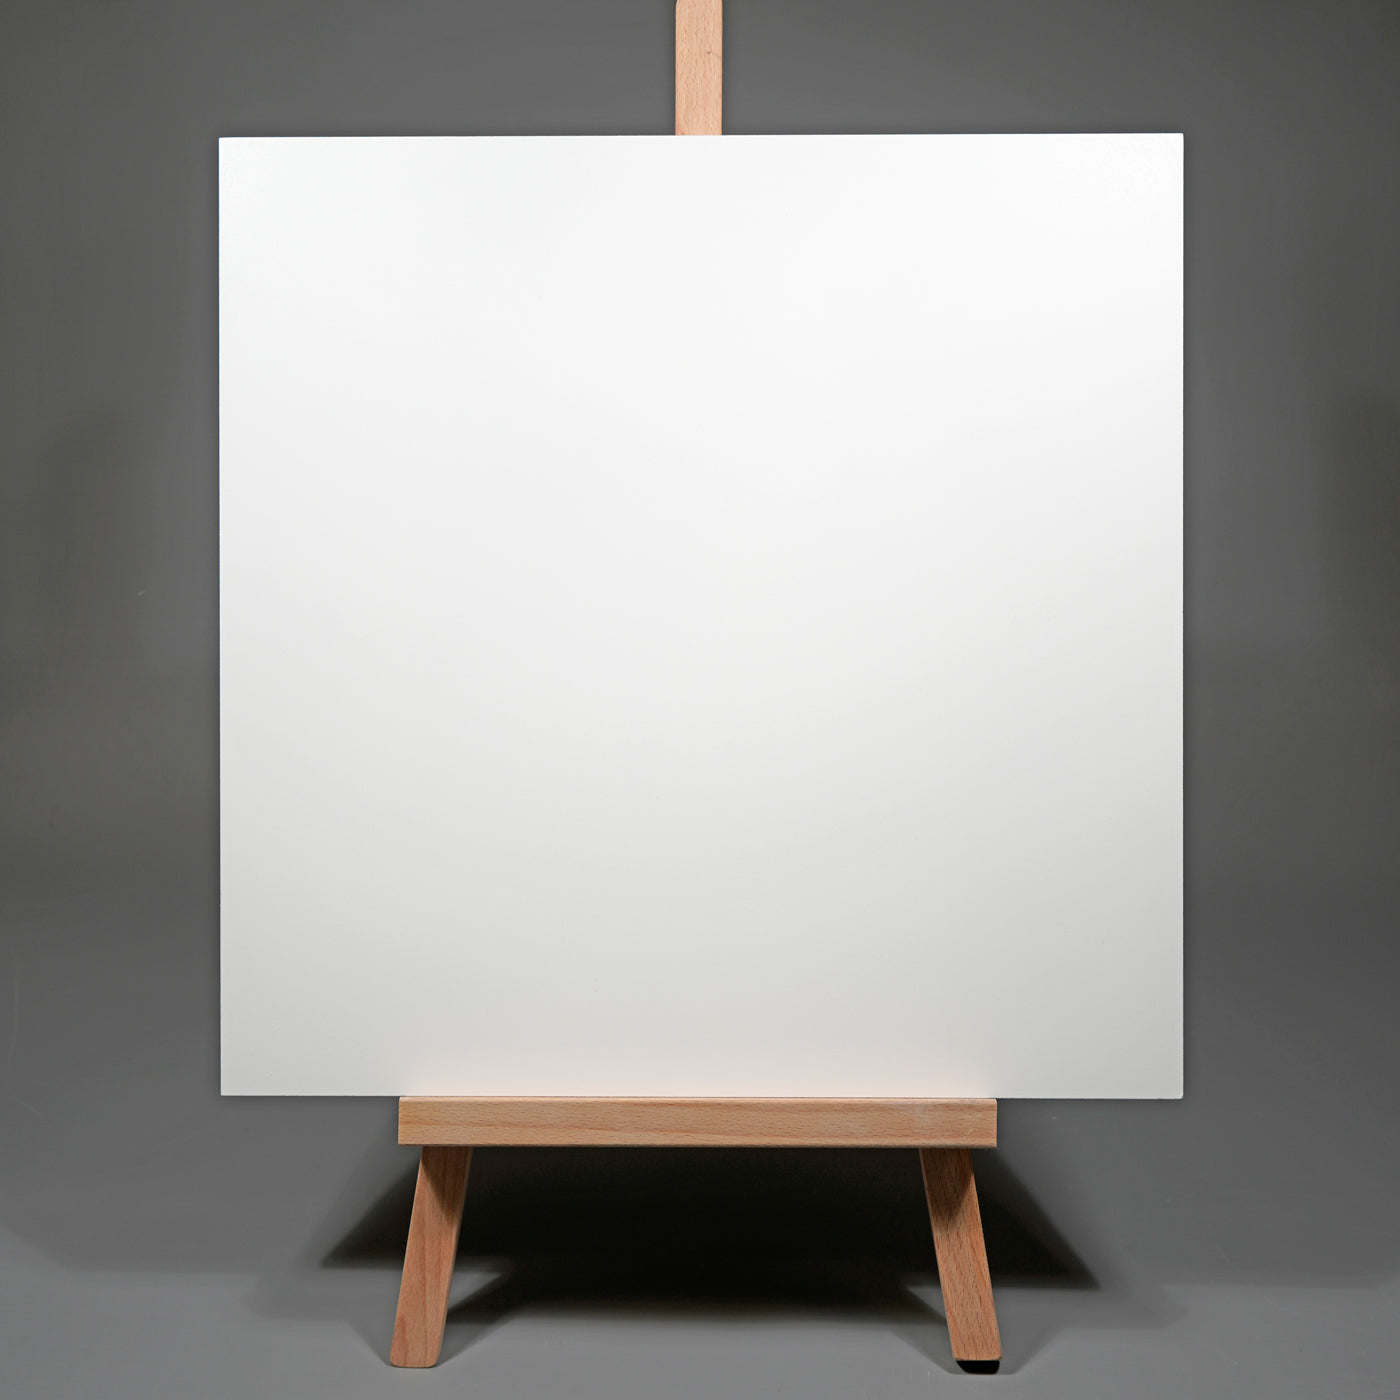 Pack of Six 16 x 16 inch Artists Exhibition Panels